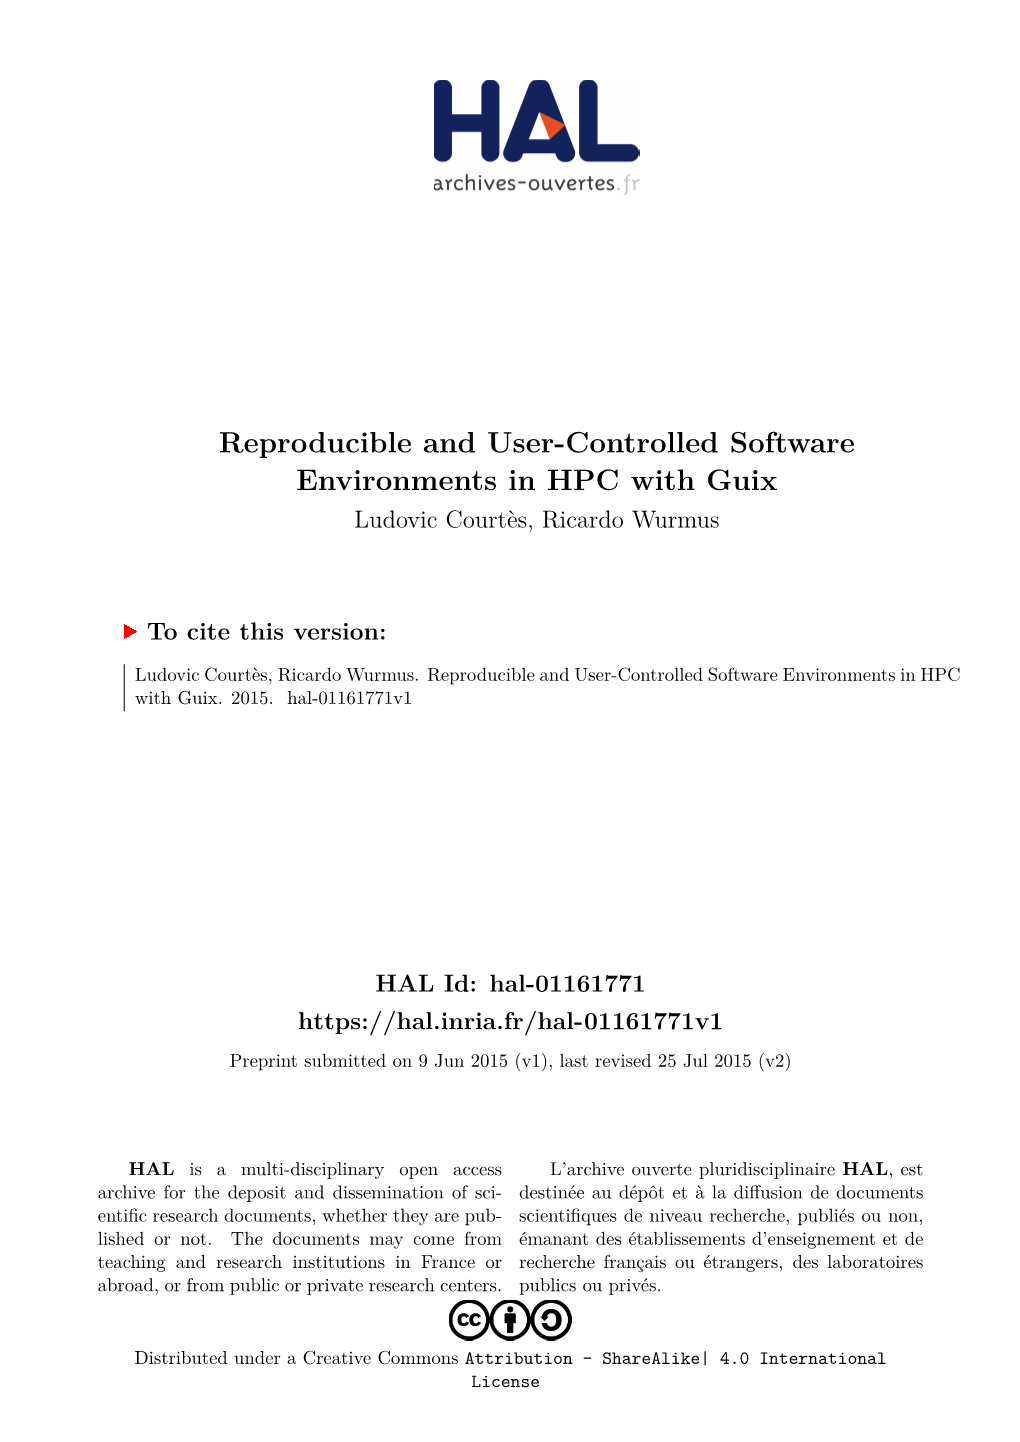 Reproducible and User-Controlled Software Environments in HPC with Guix Ludovic Courtès, Ricardo Wurmus